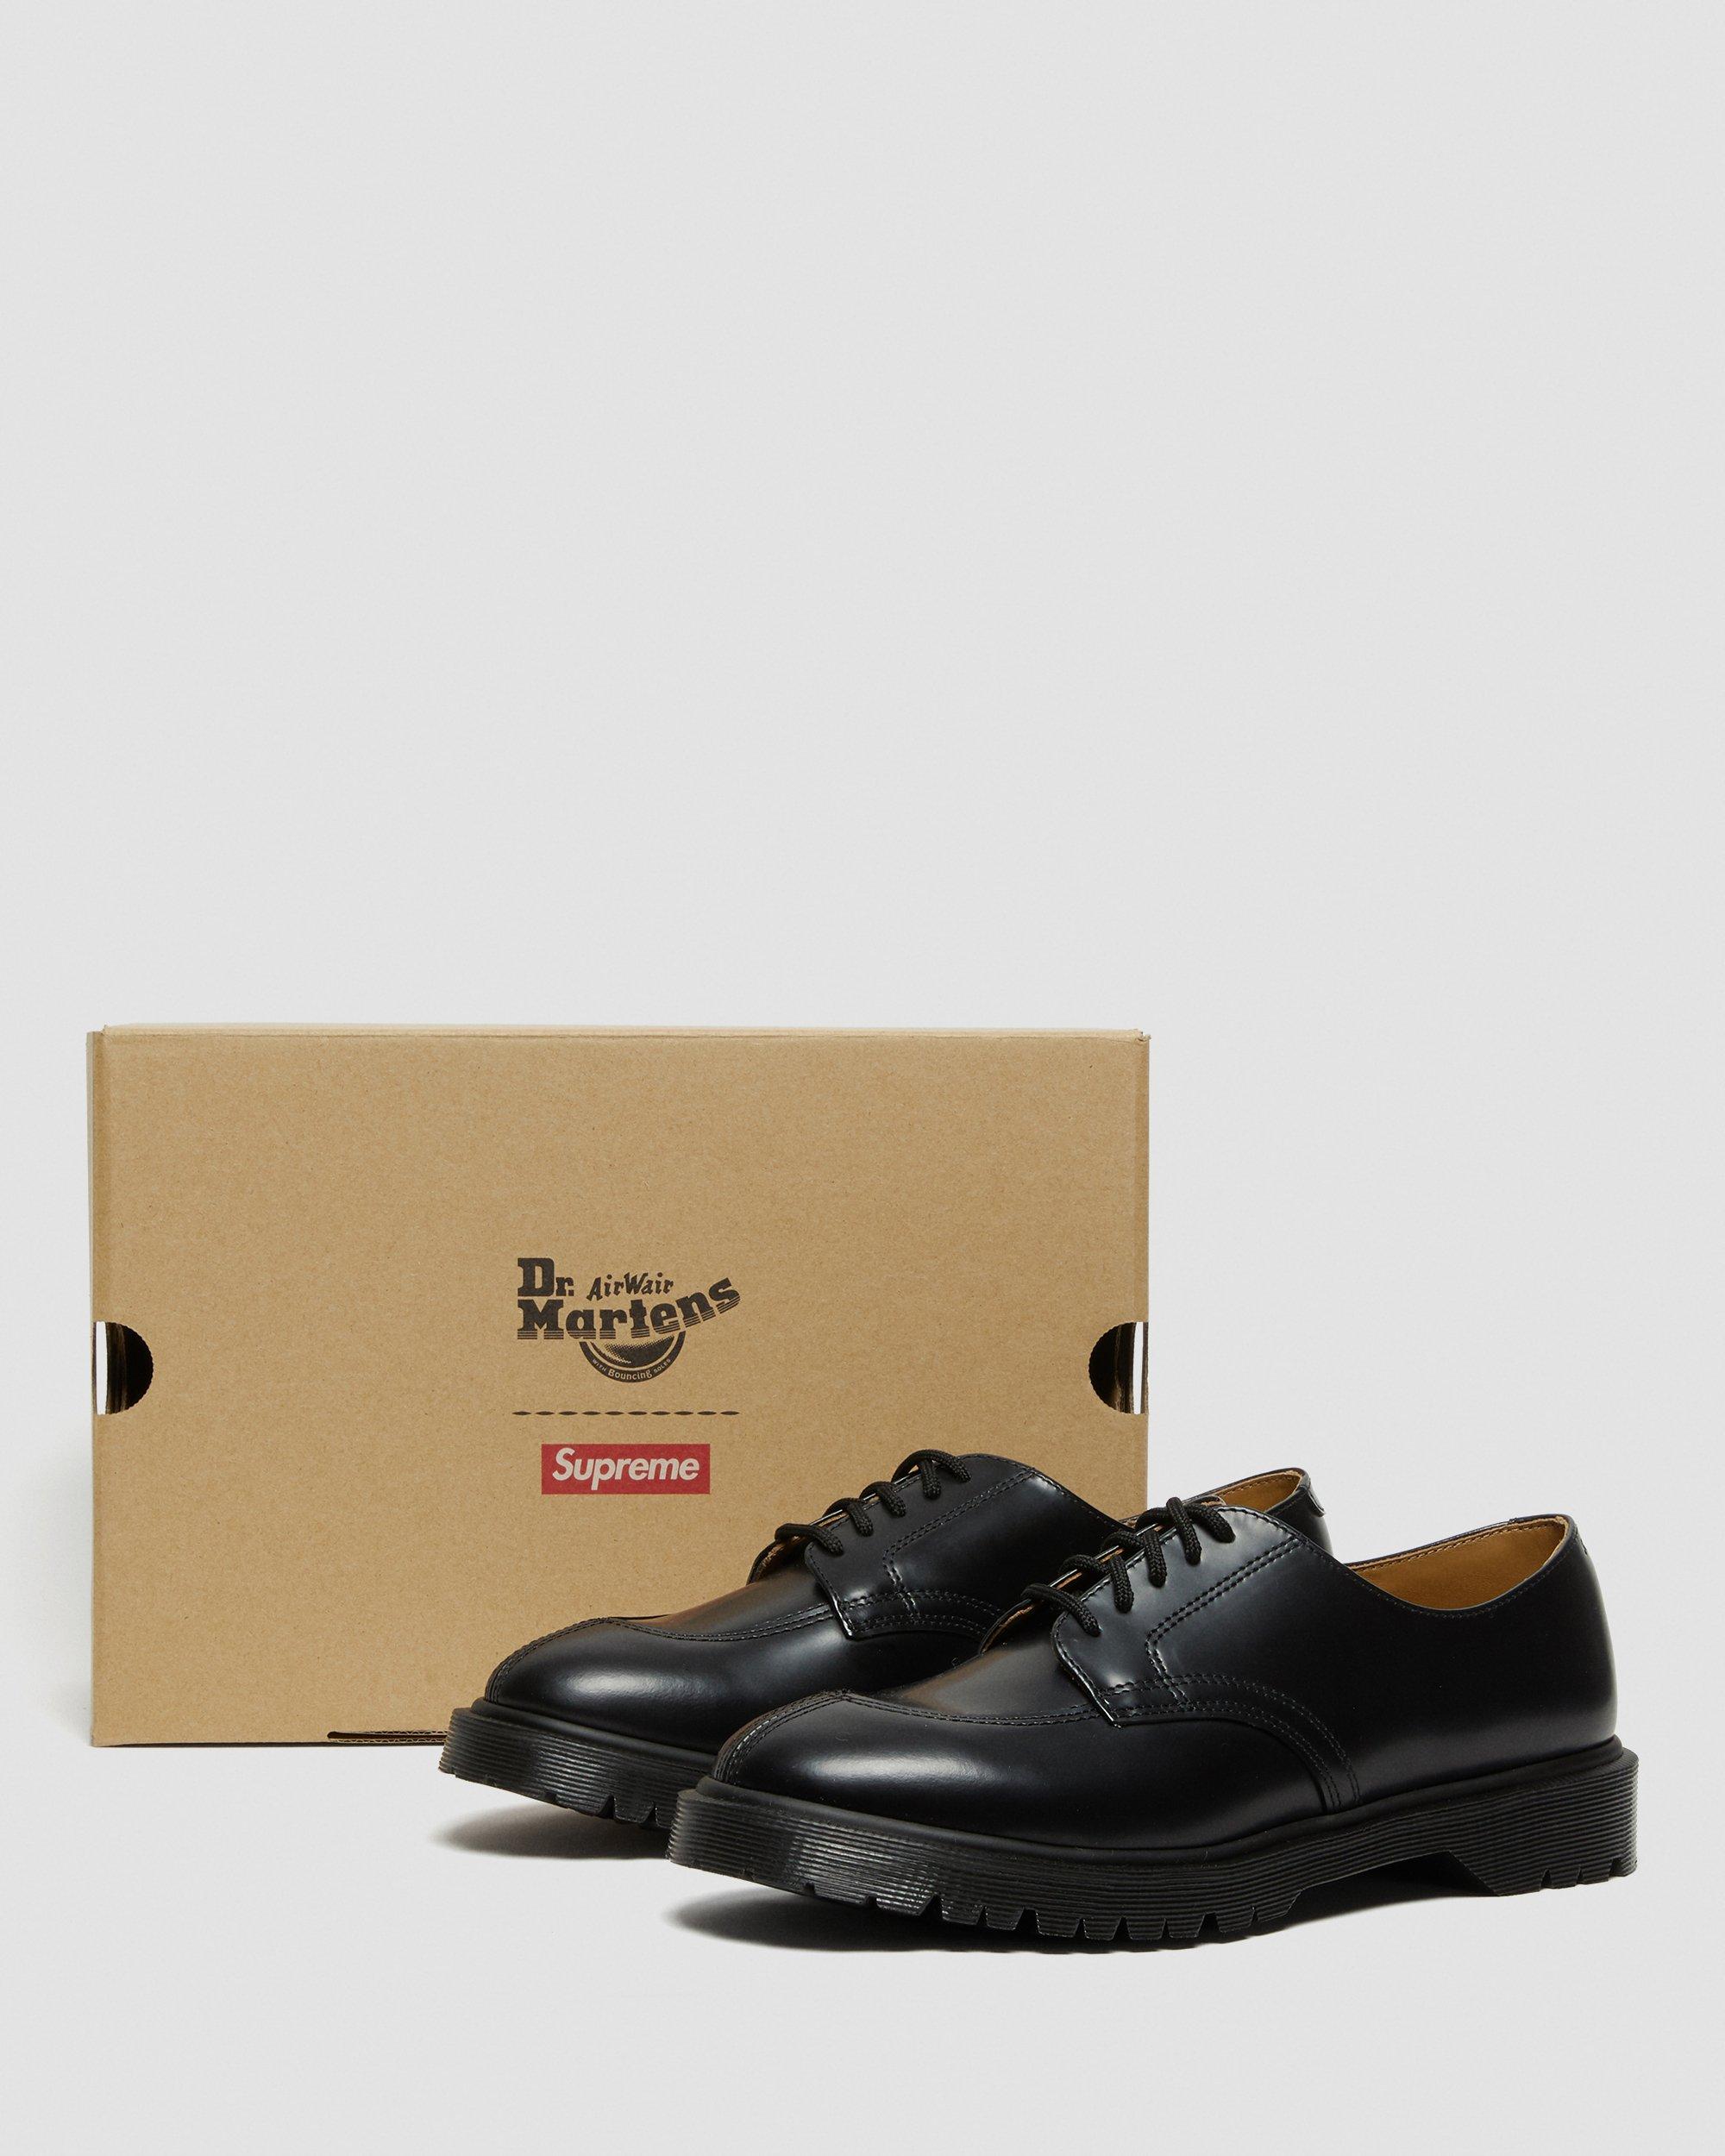 DR MARTENS Supreme® 2046 Smooth Leather Oxford Shoes